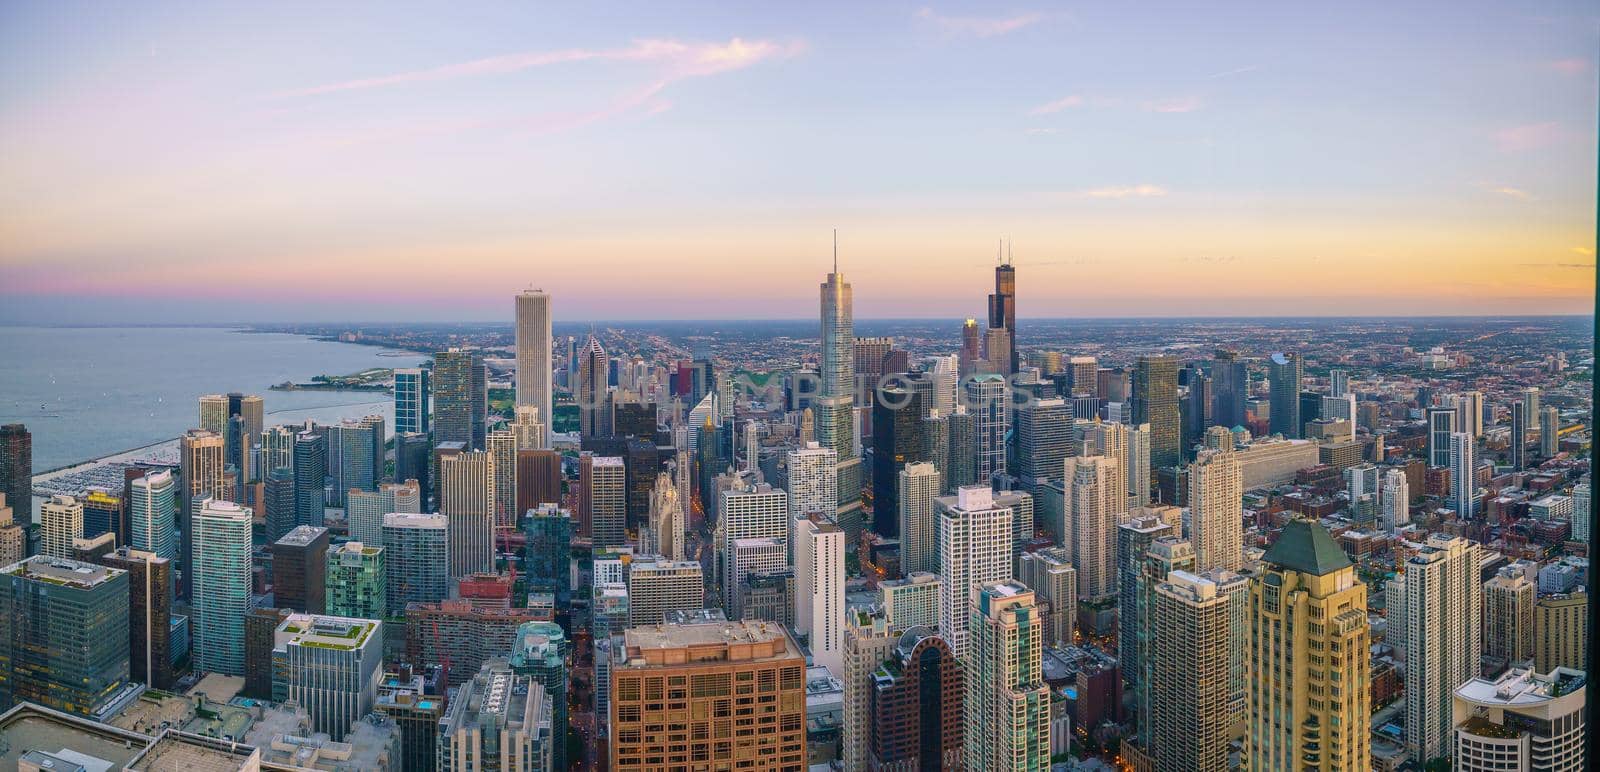 Aerial view of Chicago downtown skyline at sunset from high above.